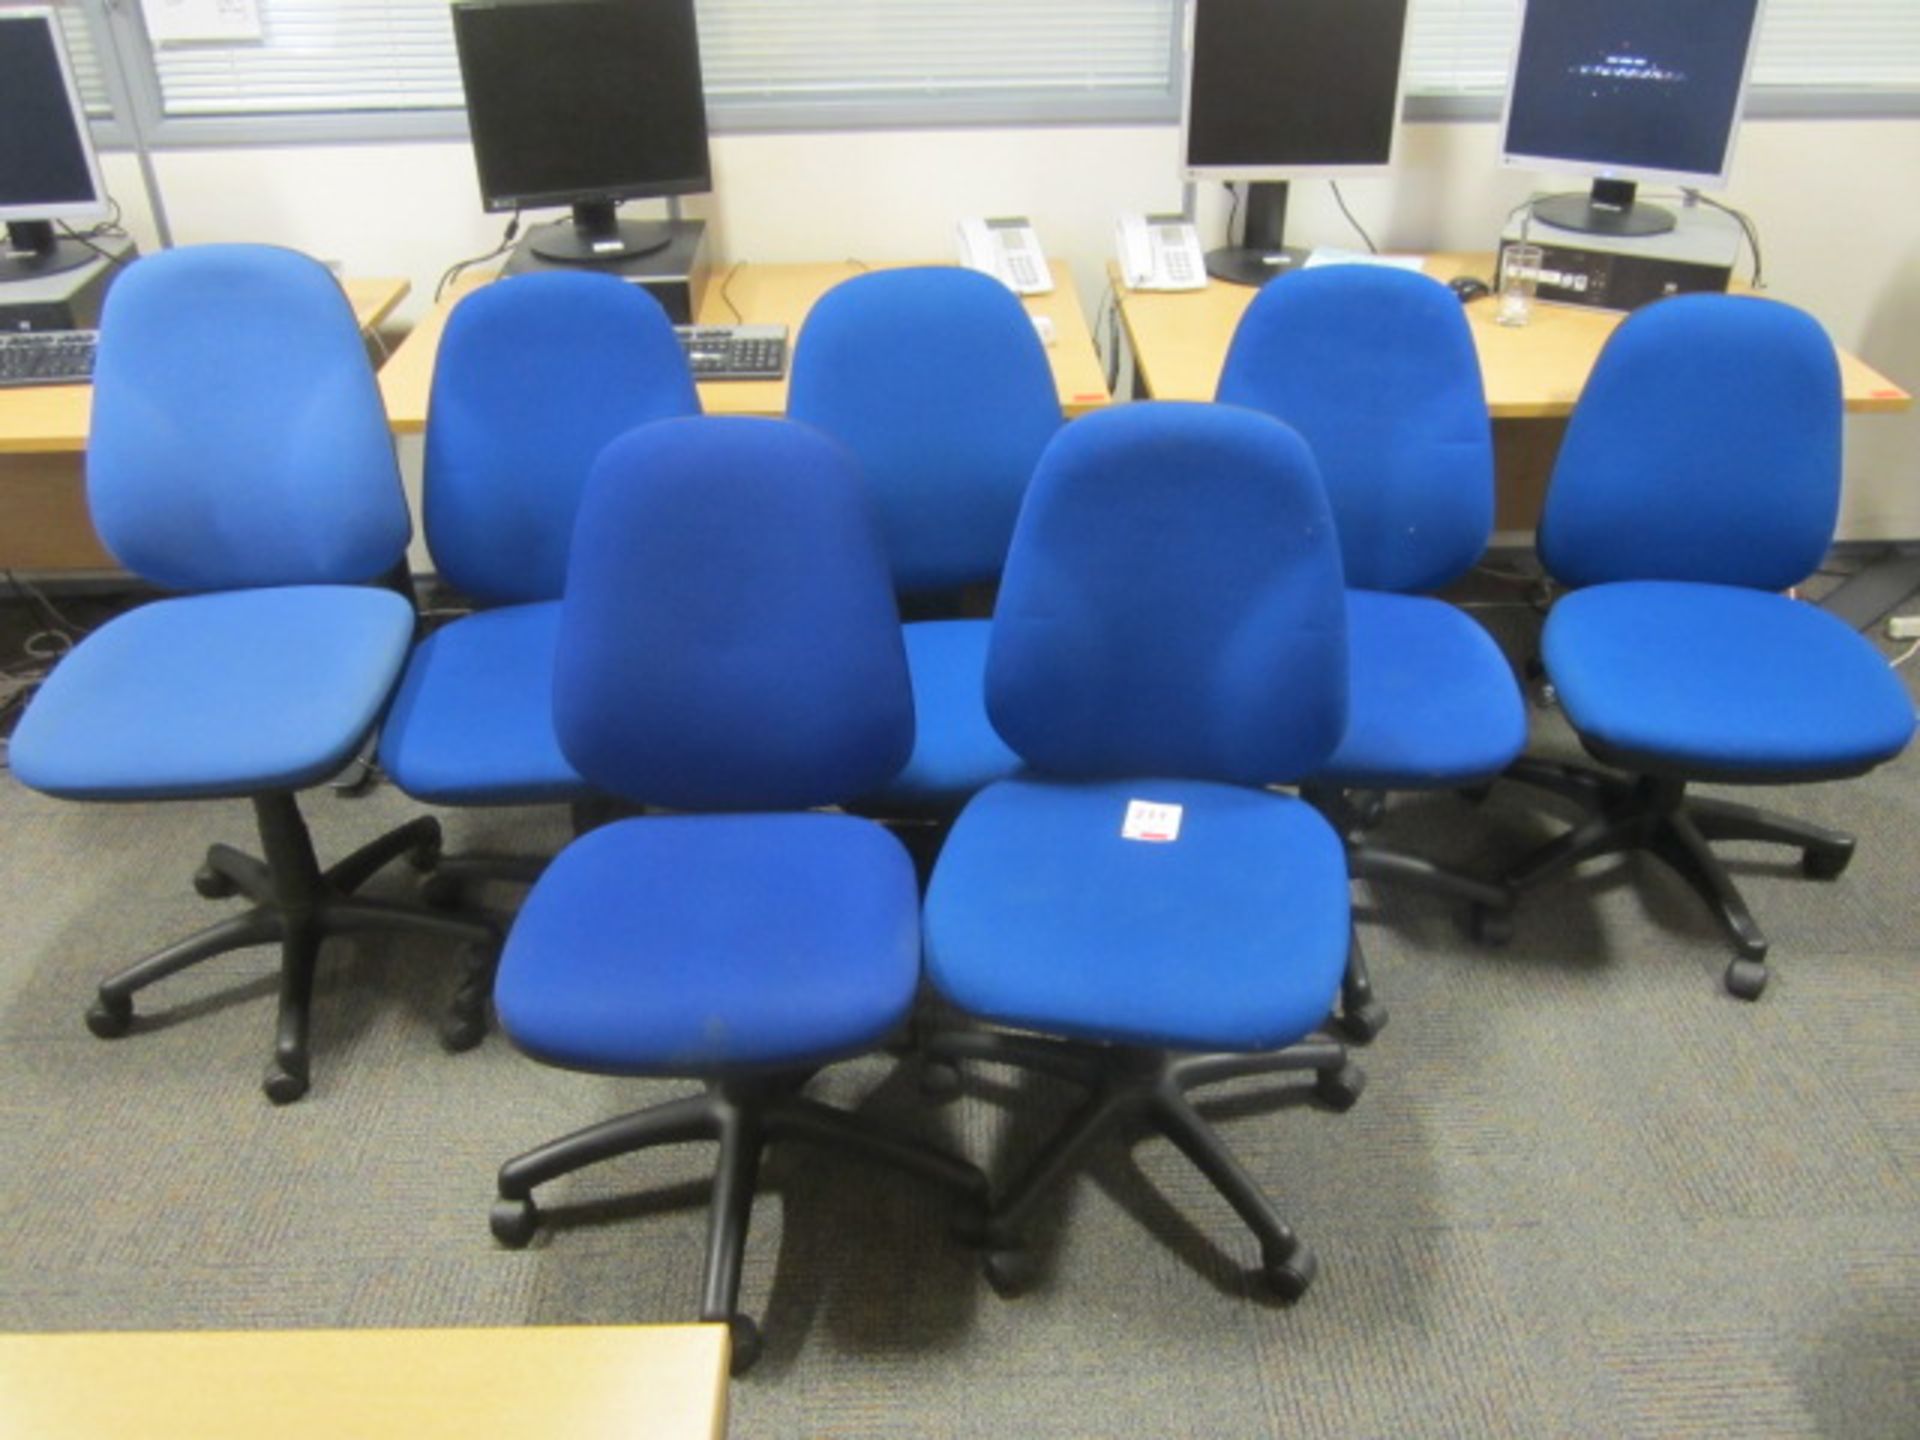 7 x Blue upholstered swivel chairs